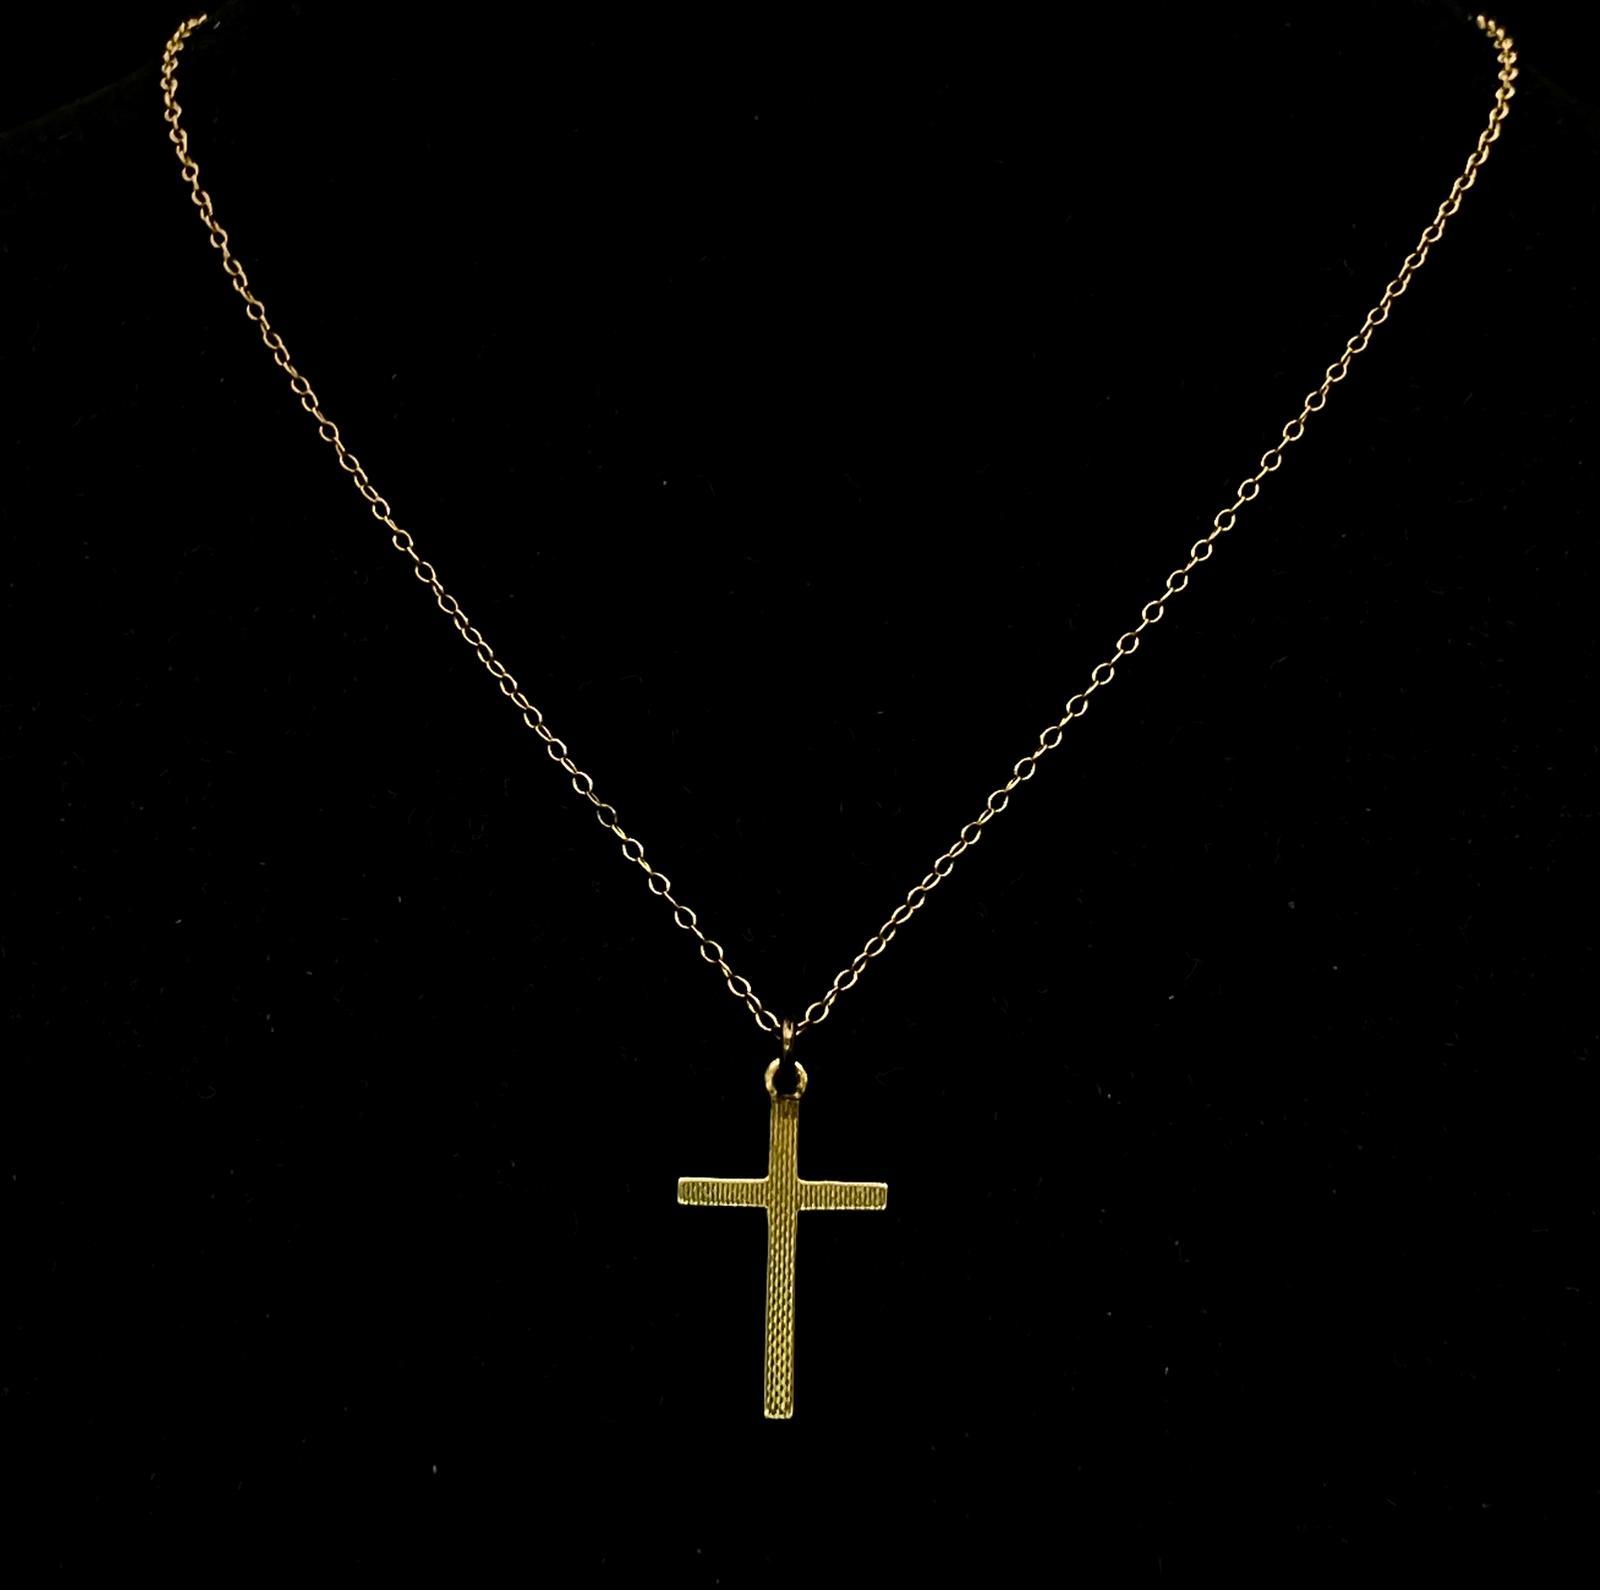 9k yellow gold patterned cross with matching 18"" belcher chain Weight: 2.9g